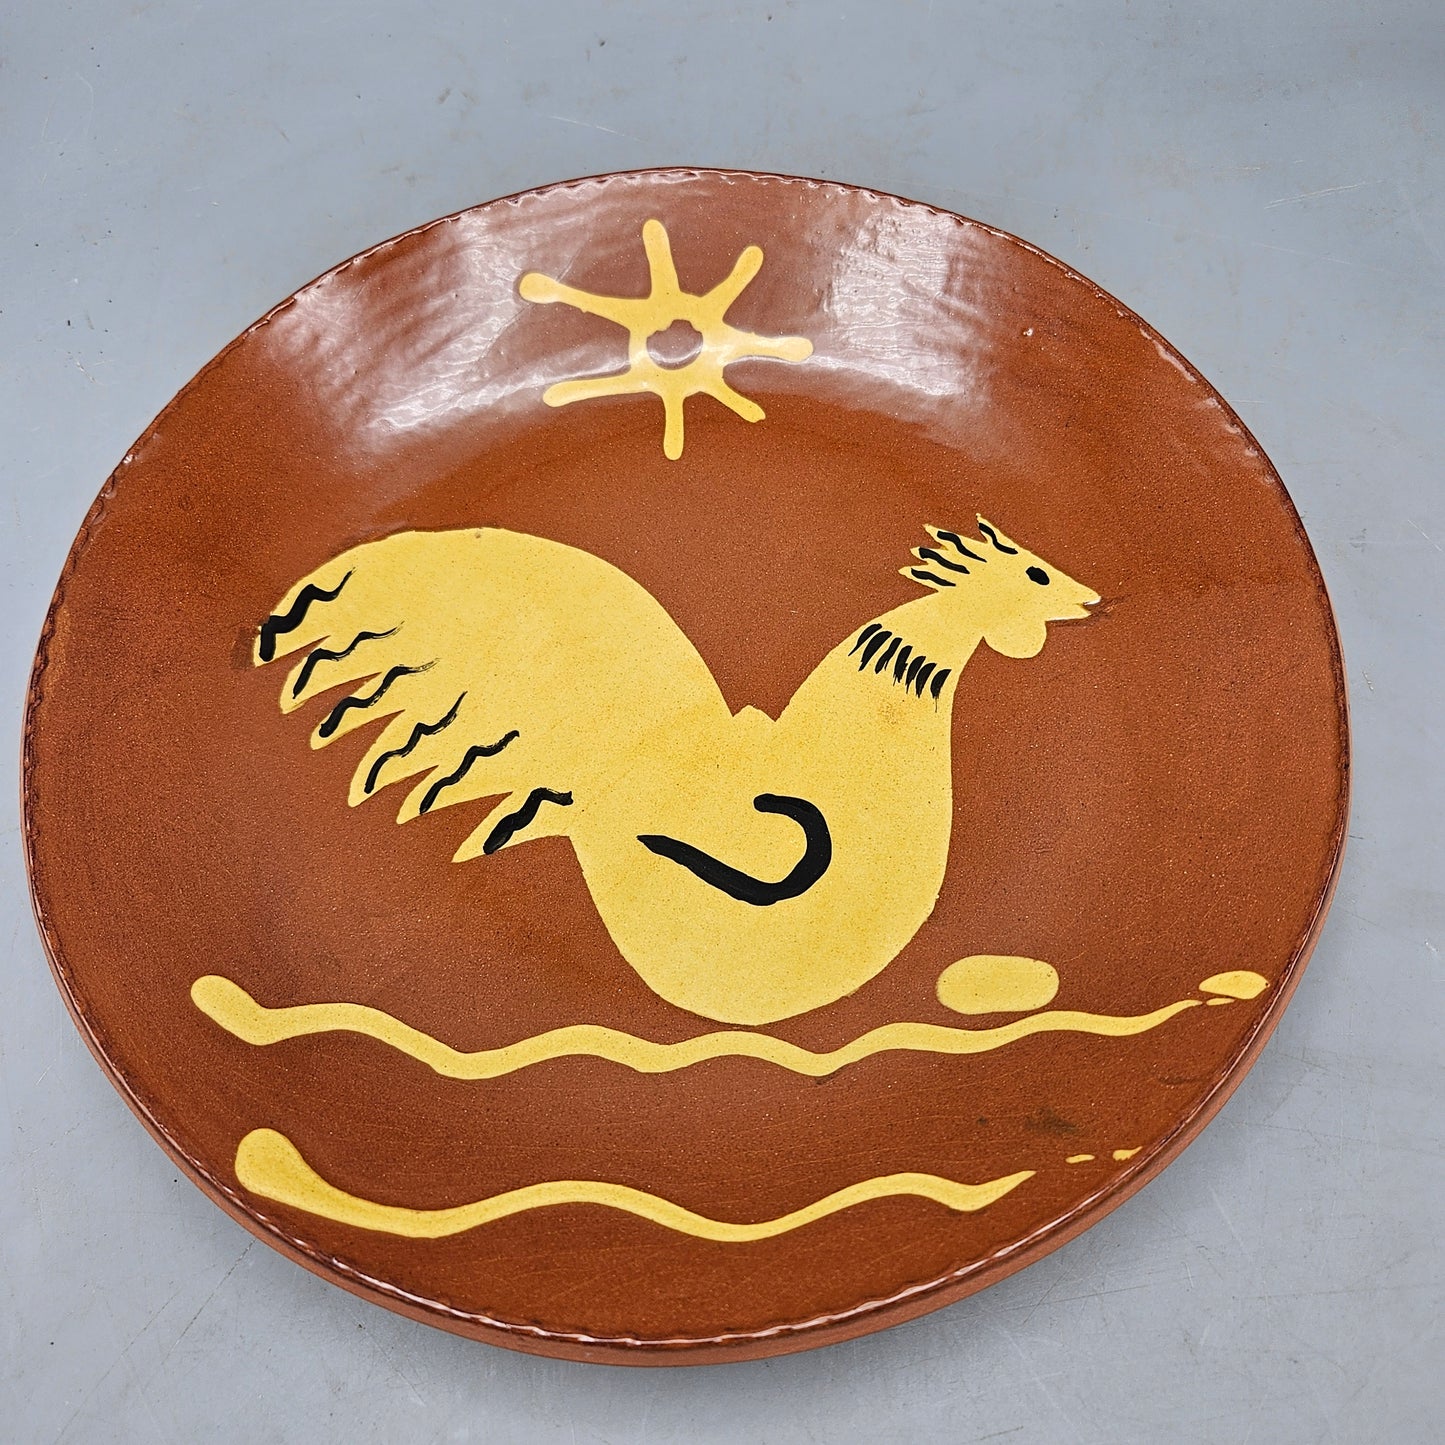 Signed Vintage Breininger Redware Pottery Plate with Rooster